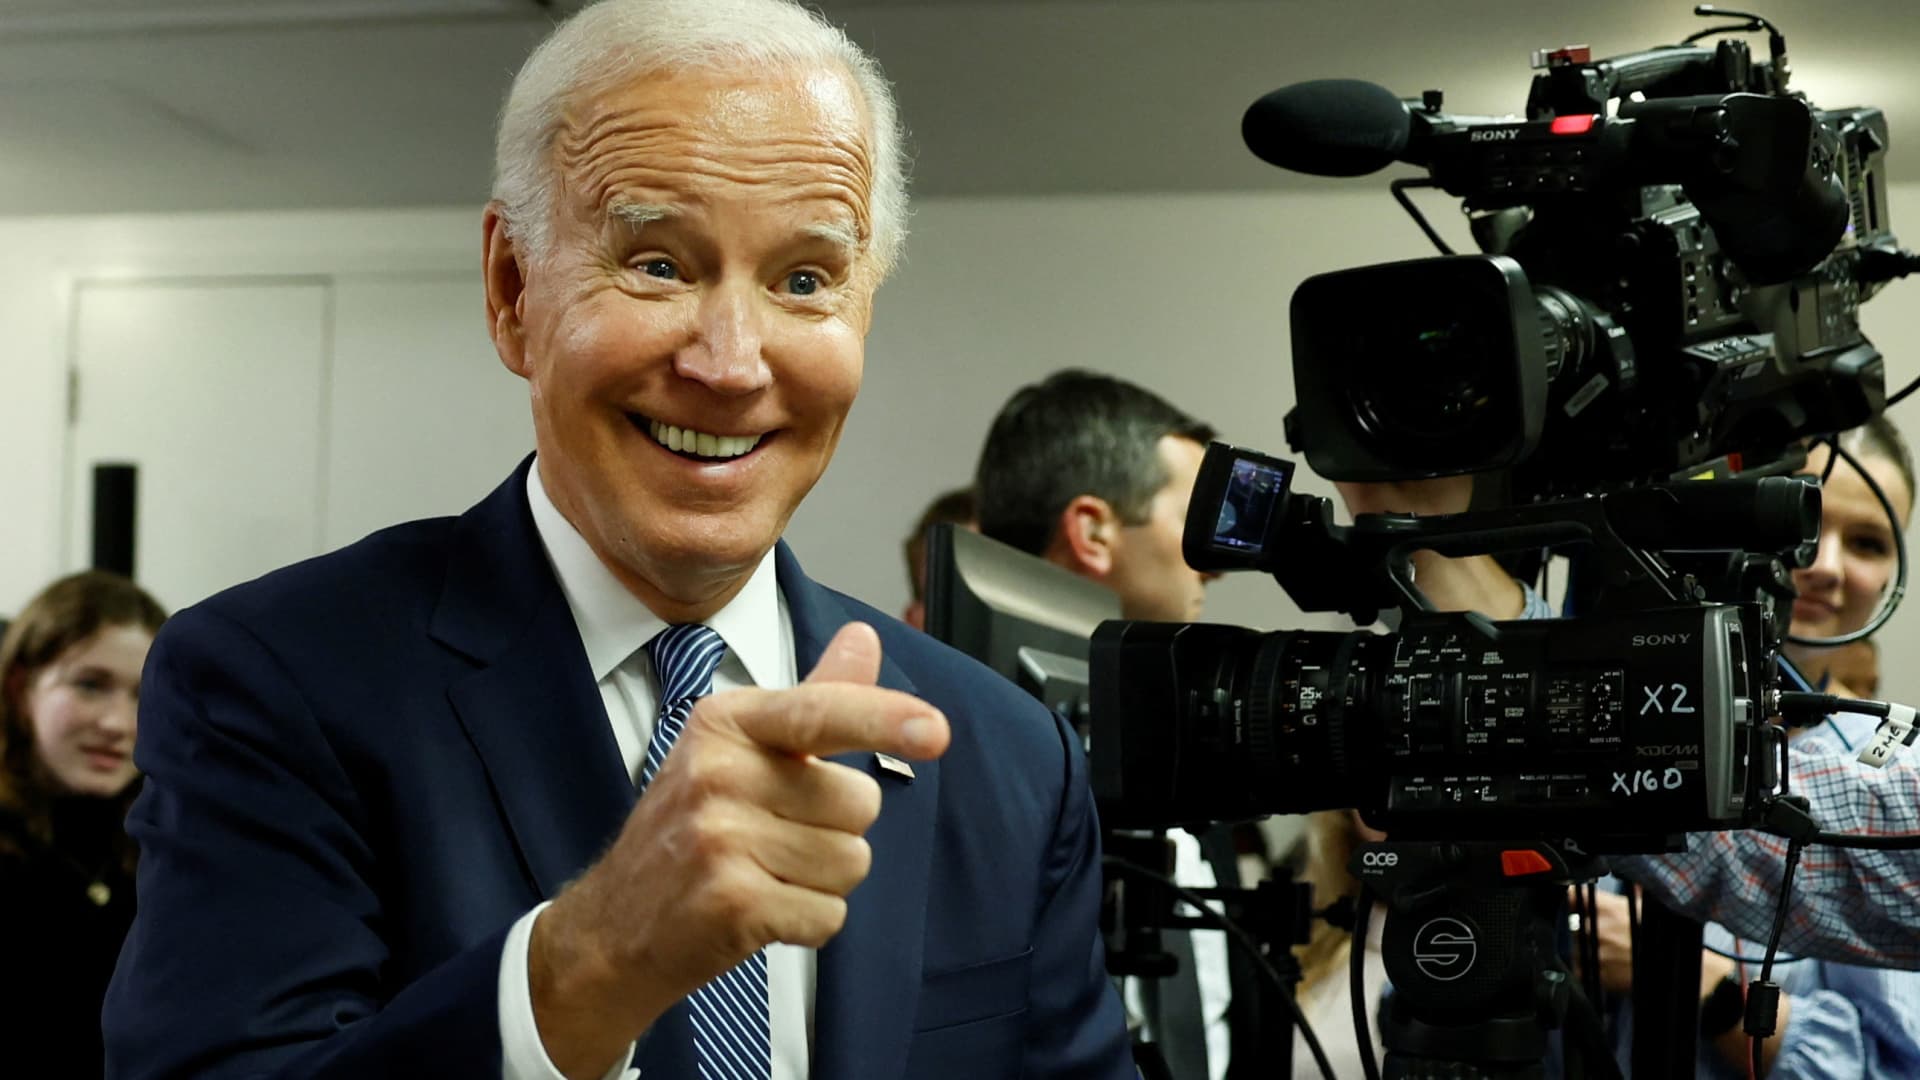 U.S. President Joe Biden laughs at the Democratic National Committee Headquarters ahead of the U.S. mid-term elections, in Washington, October 24, 2022.